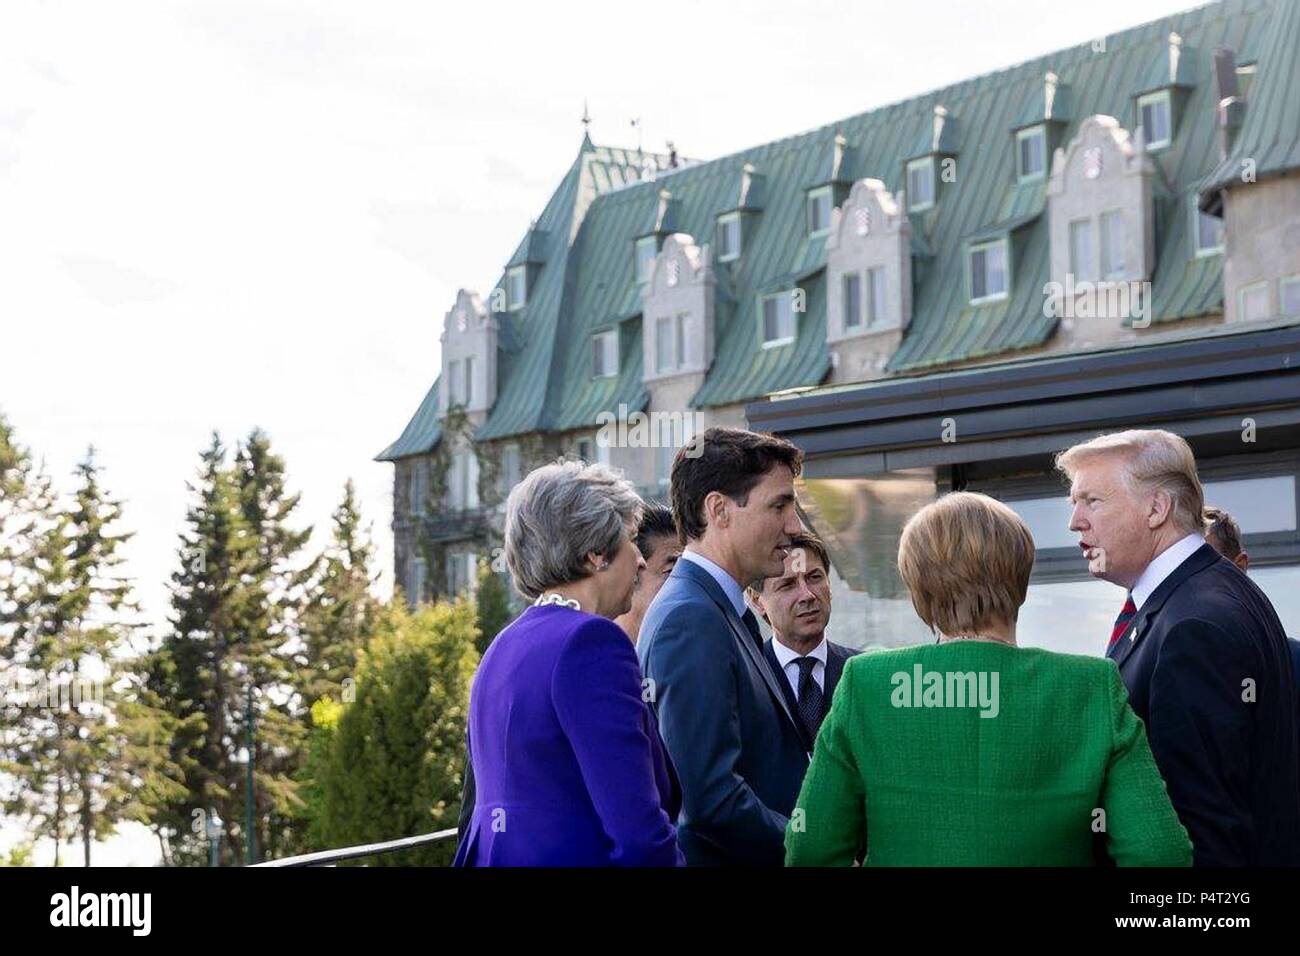 U.S. President Donald Trump, right, chats with Canadian Prime Minister Justin Trudeau, Italian Prime Minister Giuseppe Conte, German Chancellor Angela Merkel and British Prime Minister Theresa May, right during a working lunch at the G7 Summit June 8, 2018 in Charlevoix, Quebec, Canada. Stock Photo